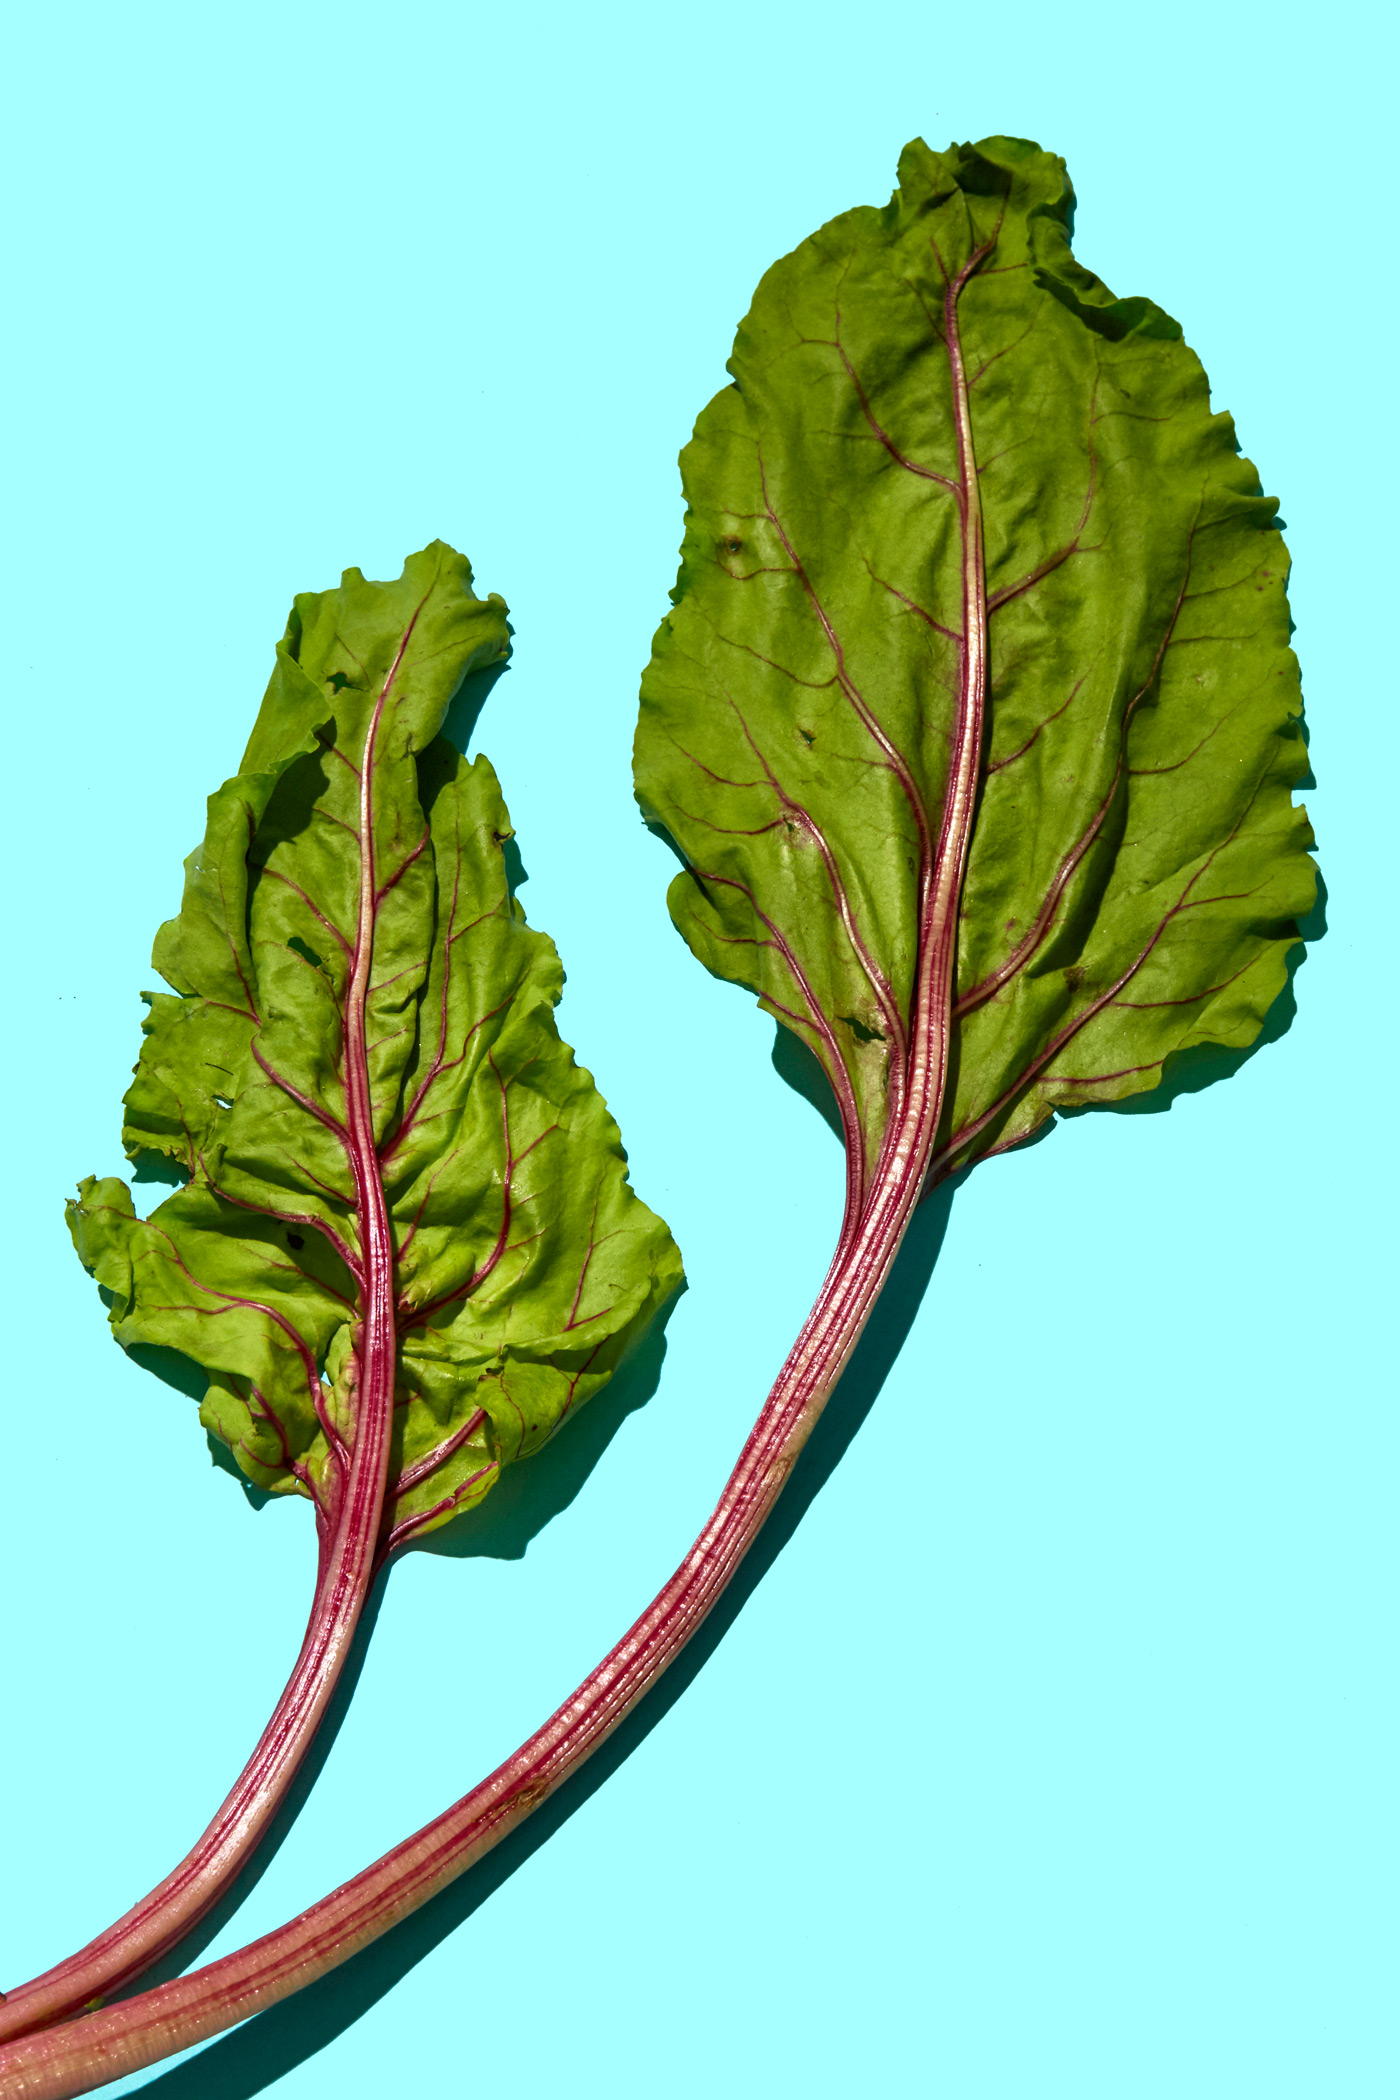 healthiest foods, health food, diet, nutrition, time.com stock, beet greens